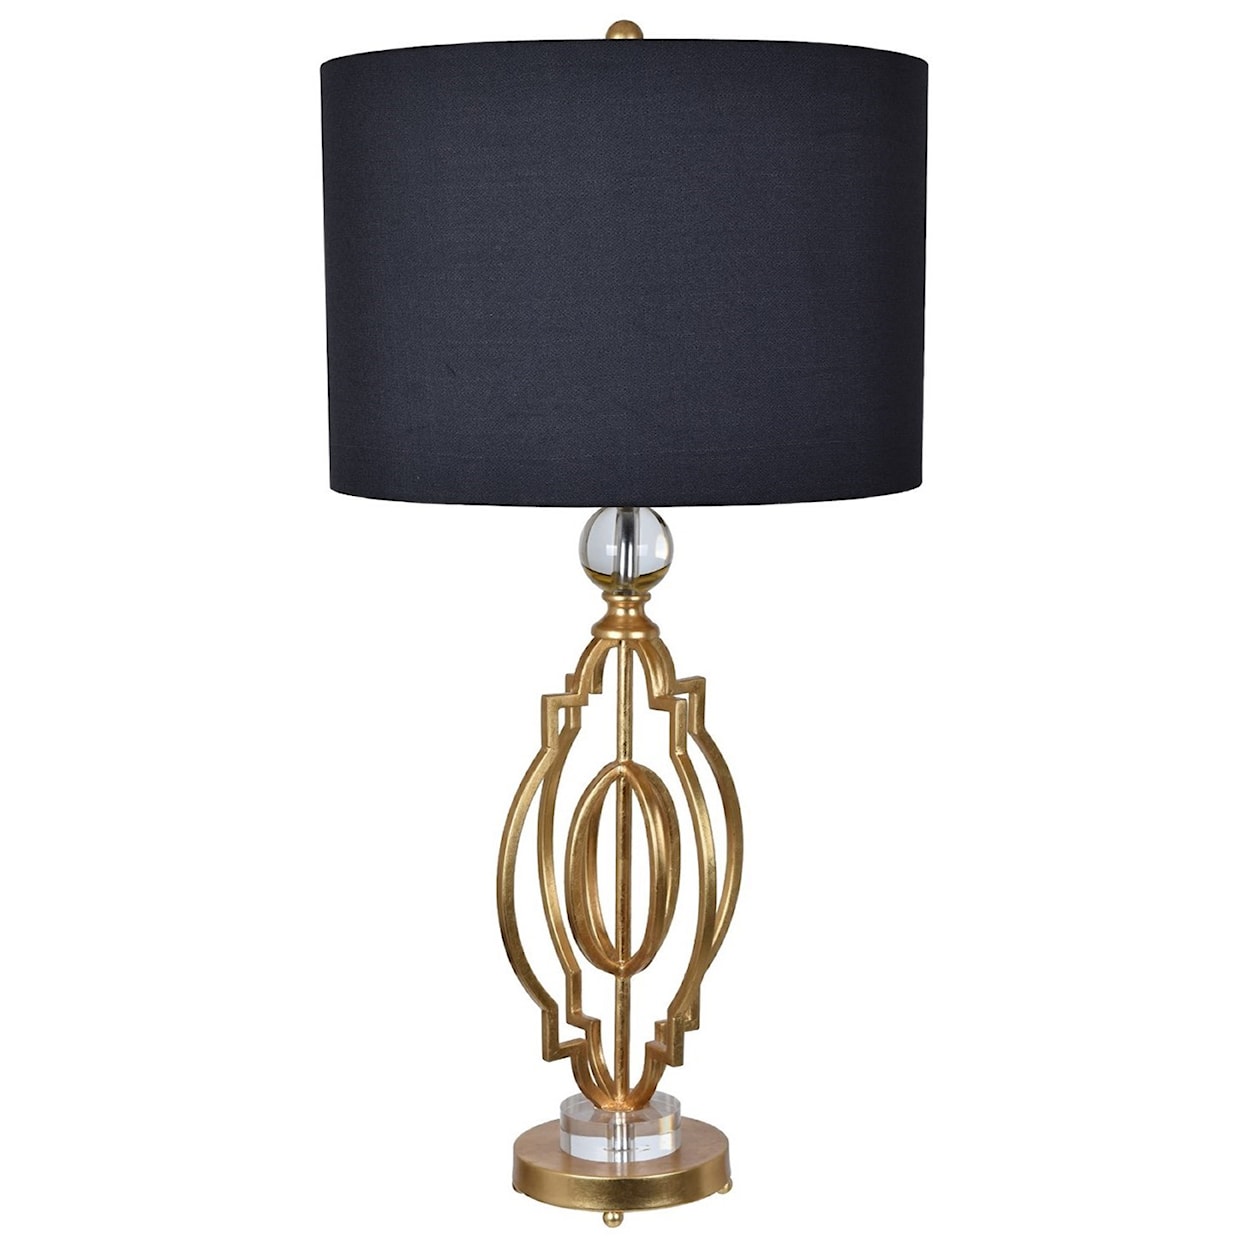 Crestview Collection Lighting Shine Table Lamp